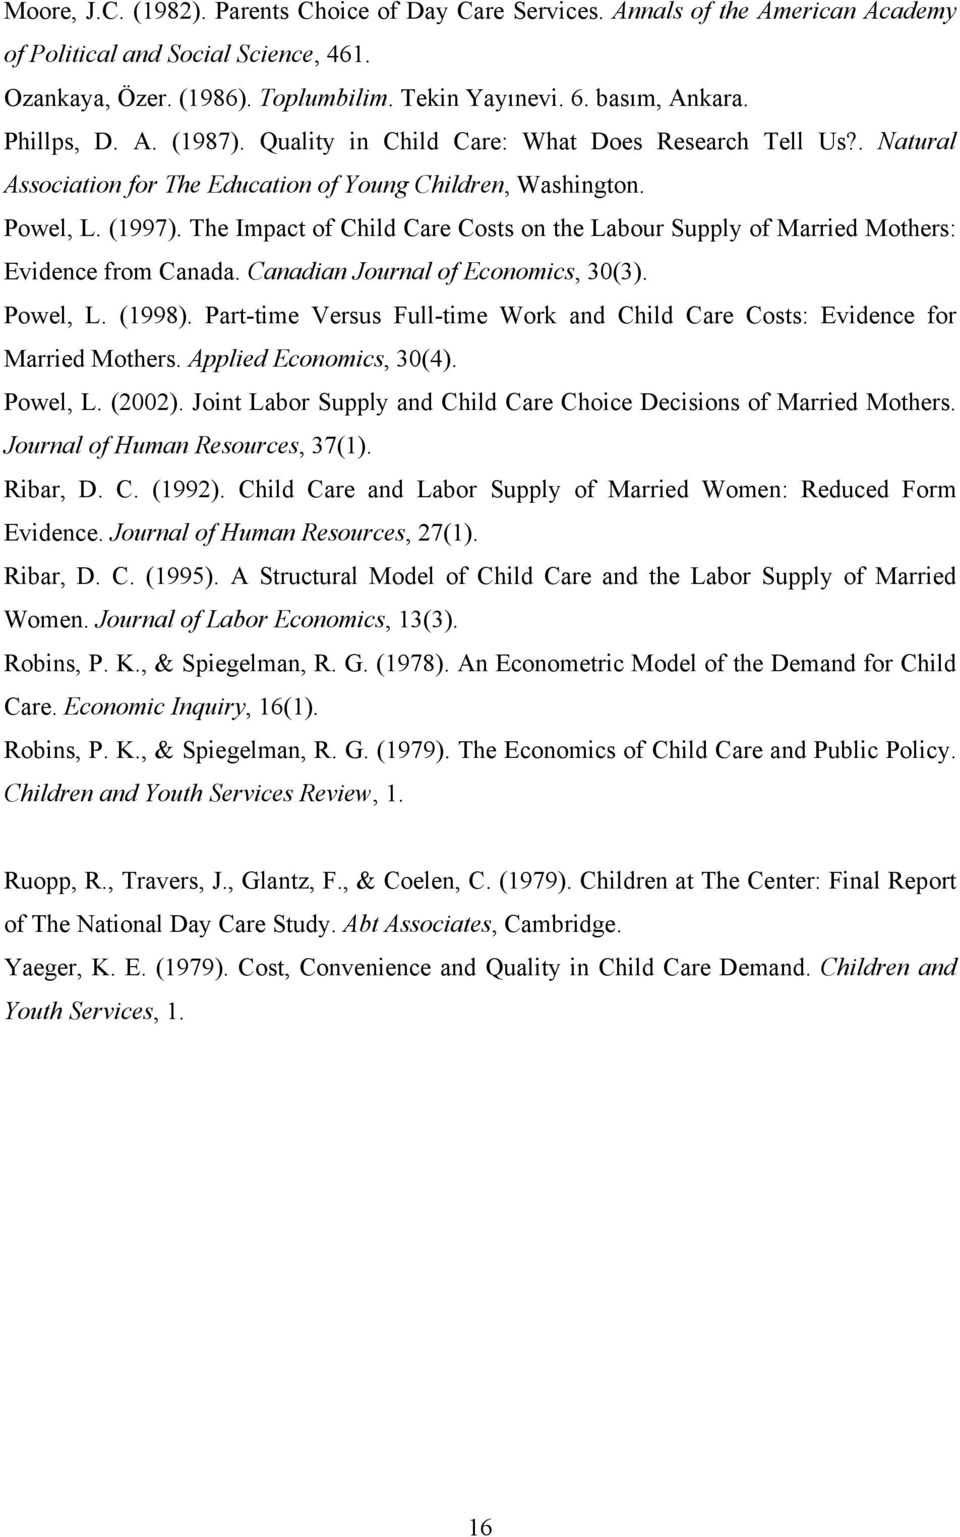 The Impact of Child Care Costs on the Labour Supply of Married Mothers: Evidence from Canada. Canadian Journal of Economics, 30(3). Powel, L. (1998).